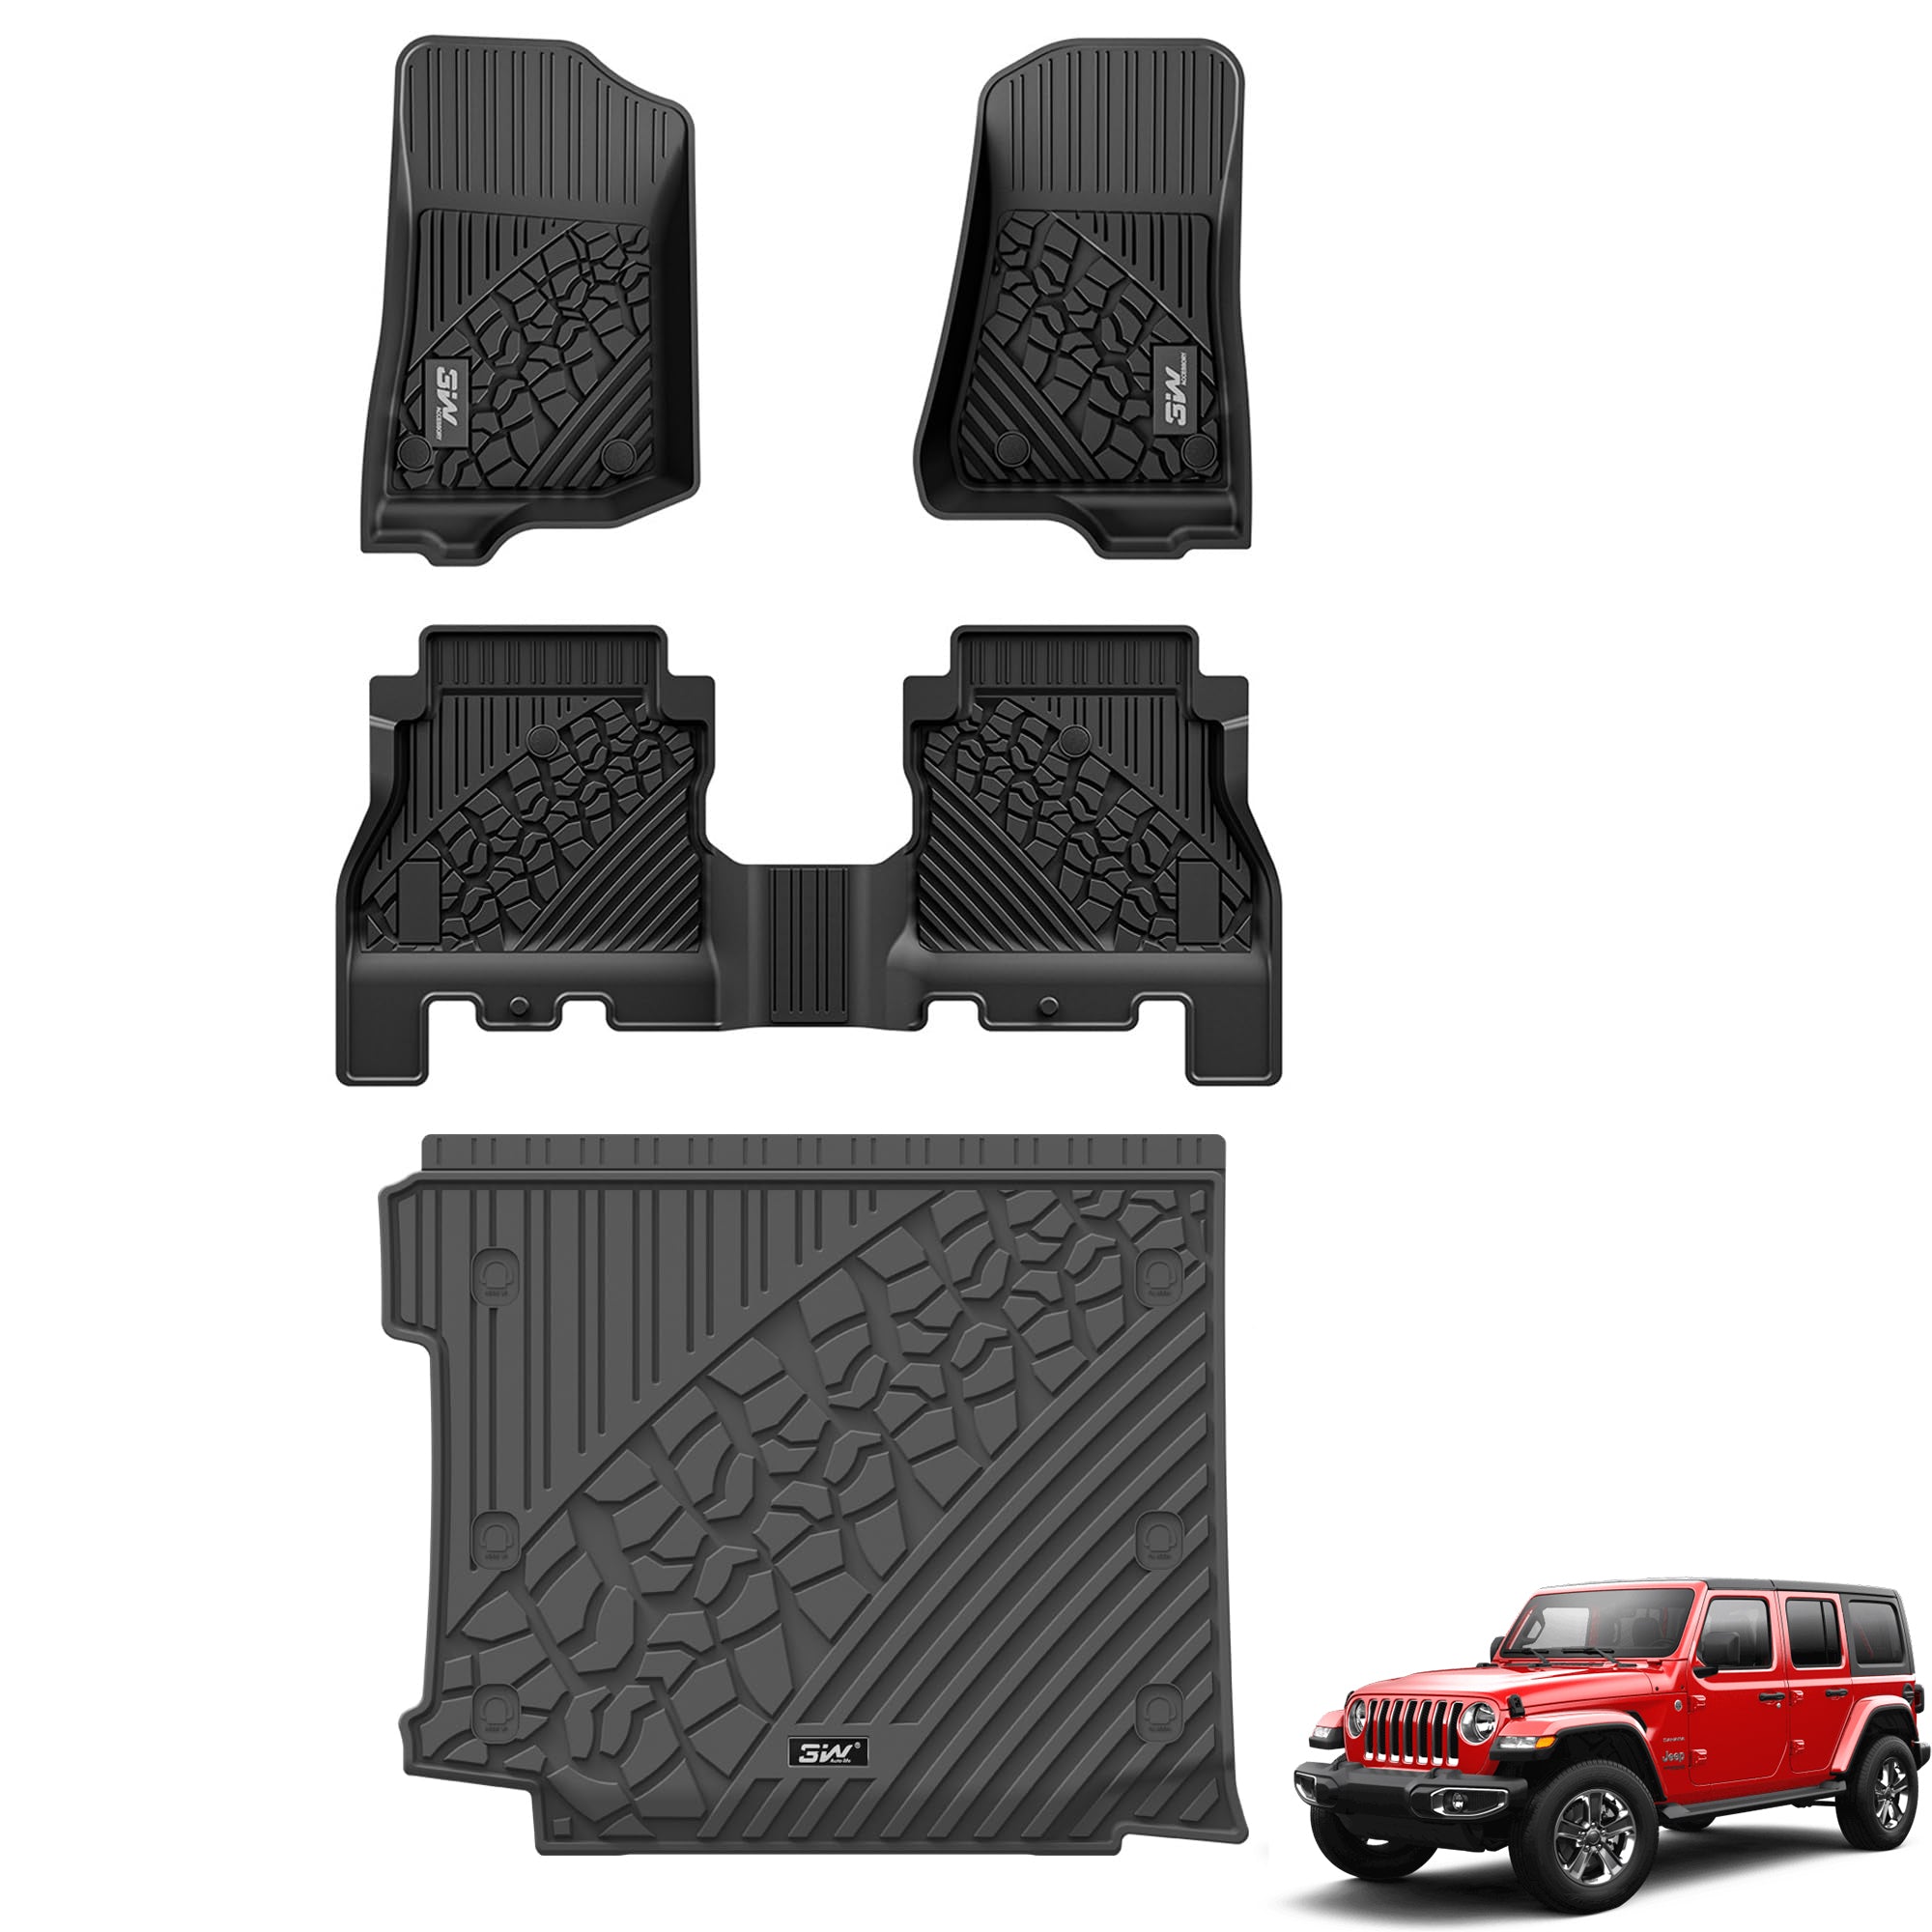 3W Jeep Wrangler JLU Custom Floor Mats or Trunk Mat 2018-2024 Unlimited 4-Door TPE Material & All-Weather Protection Vehicles & Parts 3Wliners 2018-2024 JL with Subwoofer 2018-2024 1st&2nd Row Mats+Trunk Mat